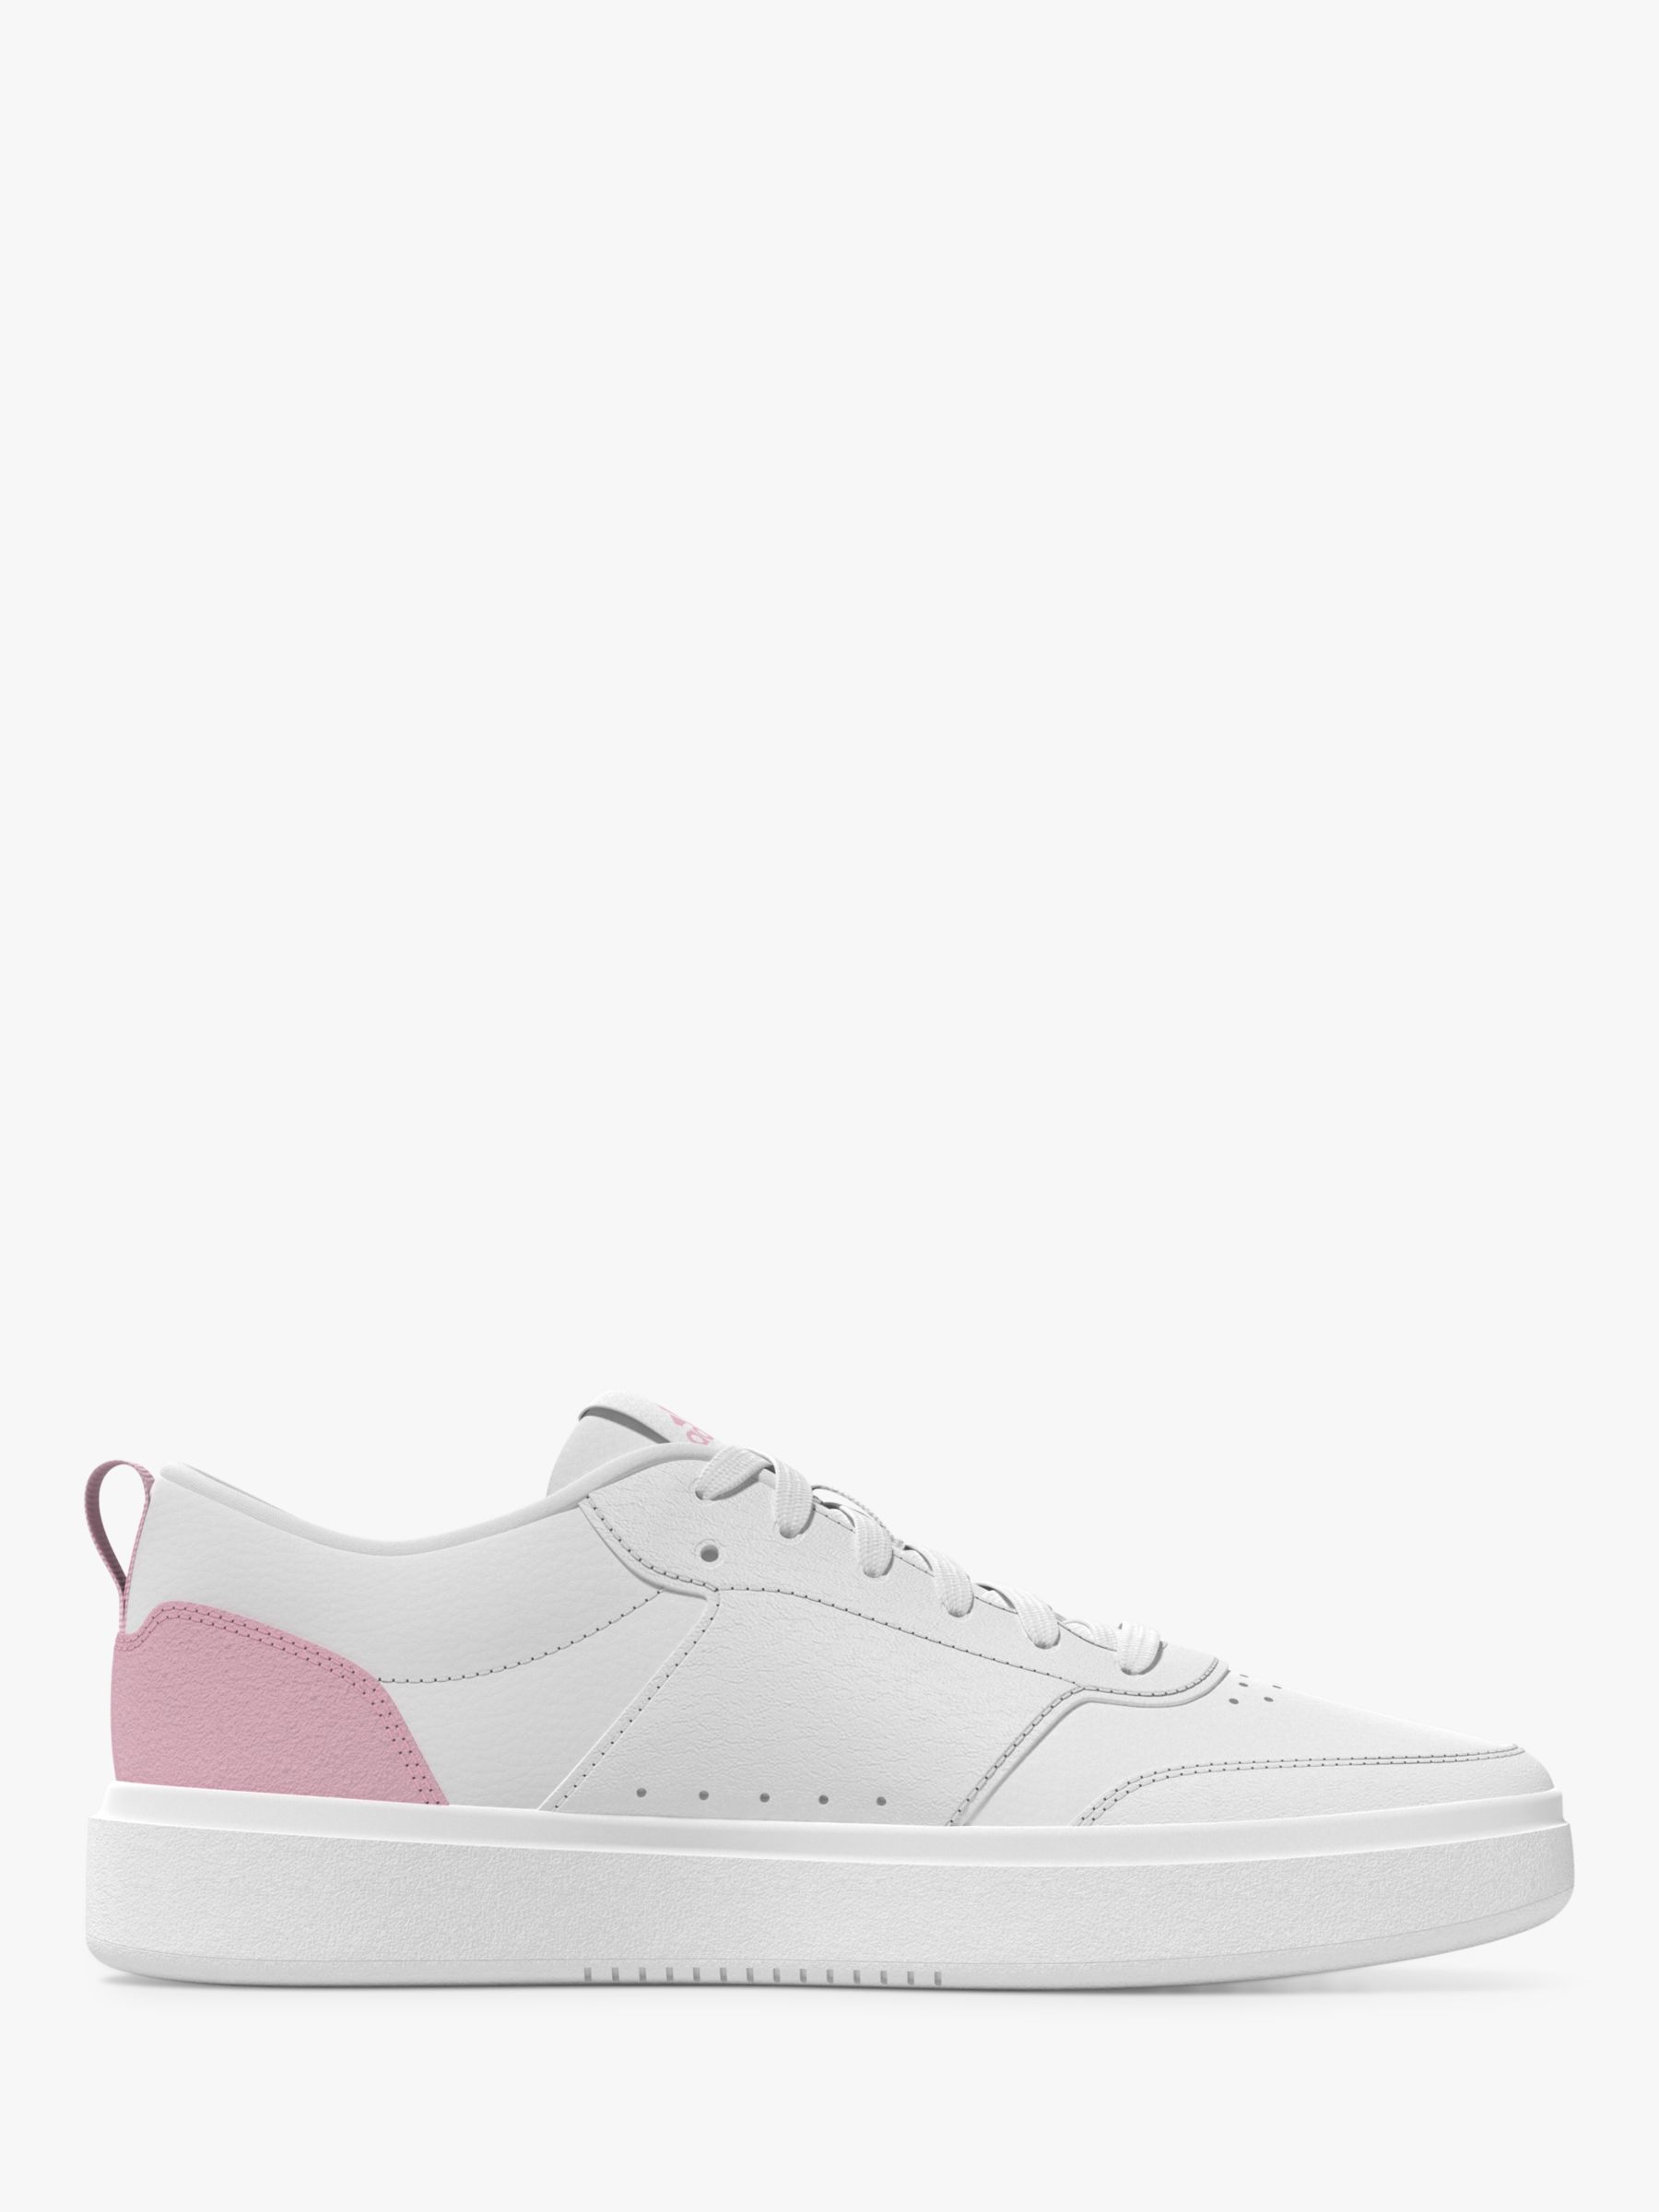 adidas Park Street Lace-Up Trainers, White/Pink at John Lewis & Partners